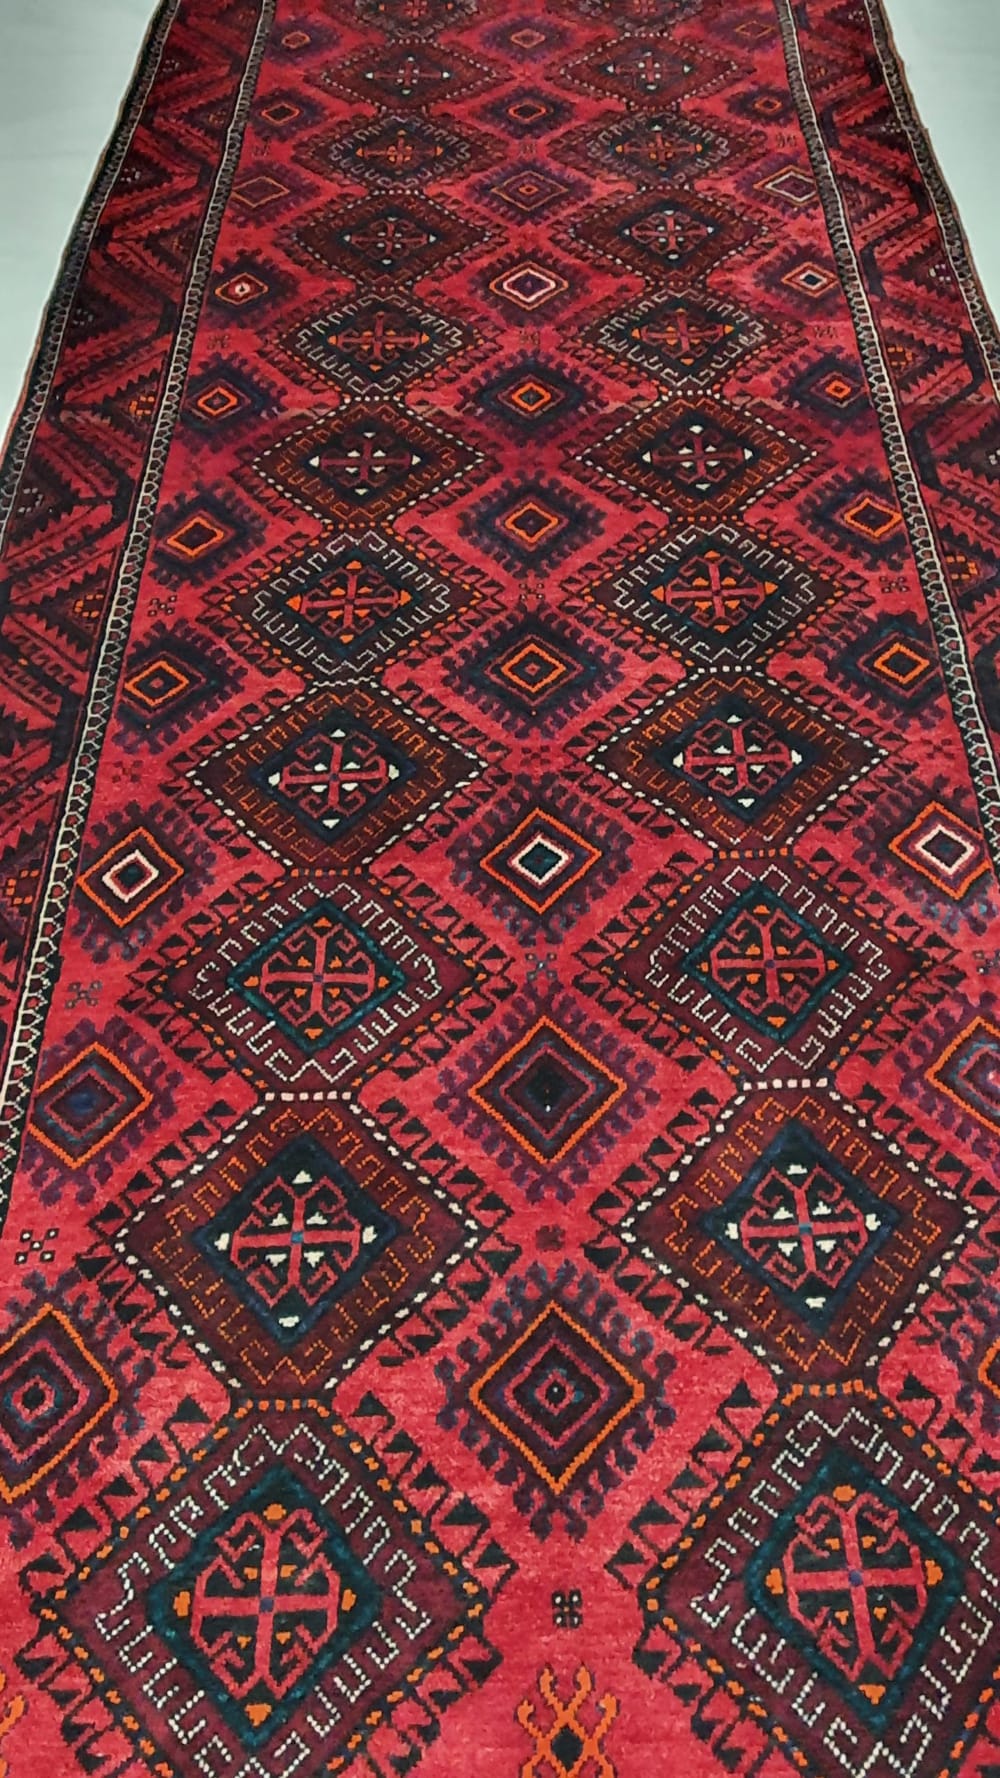 Rug# 4285, vintage bedding cover Balouch, c.1950, Galleria Rug, Persia, size 390x160 cm, RRP $4000, on special $1200 (5)